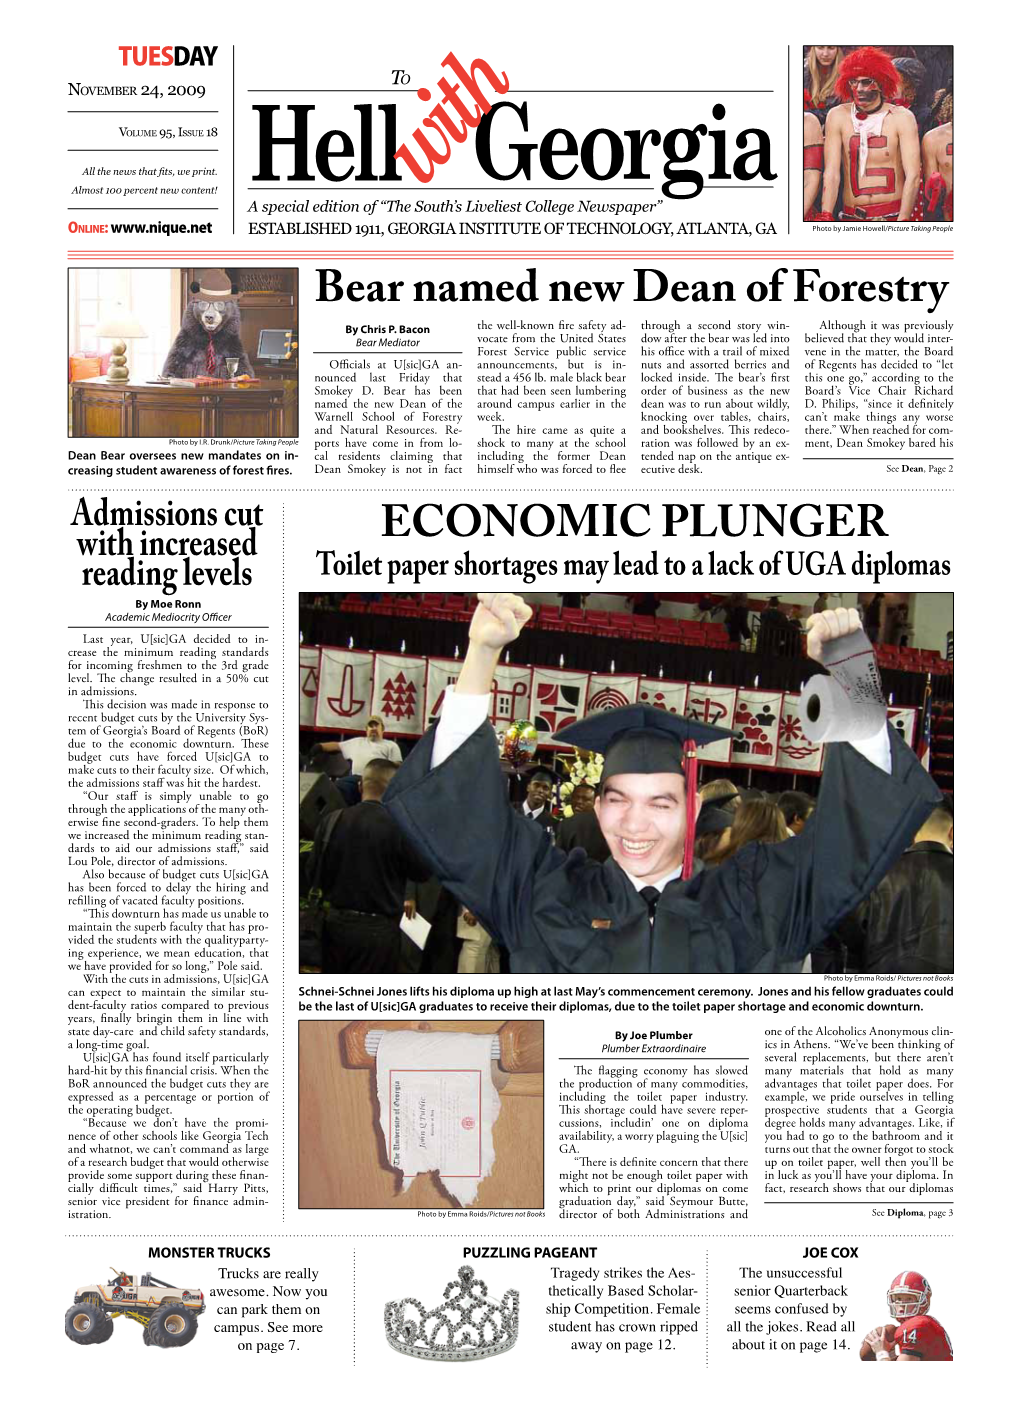 ECONOMIC PLUNGER Bear Named New Dean of Forestry